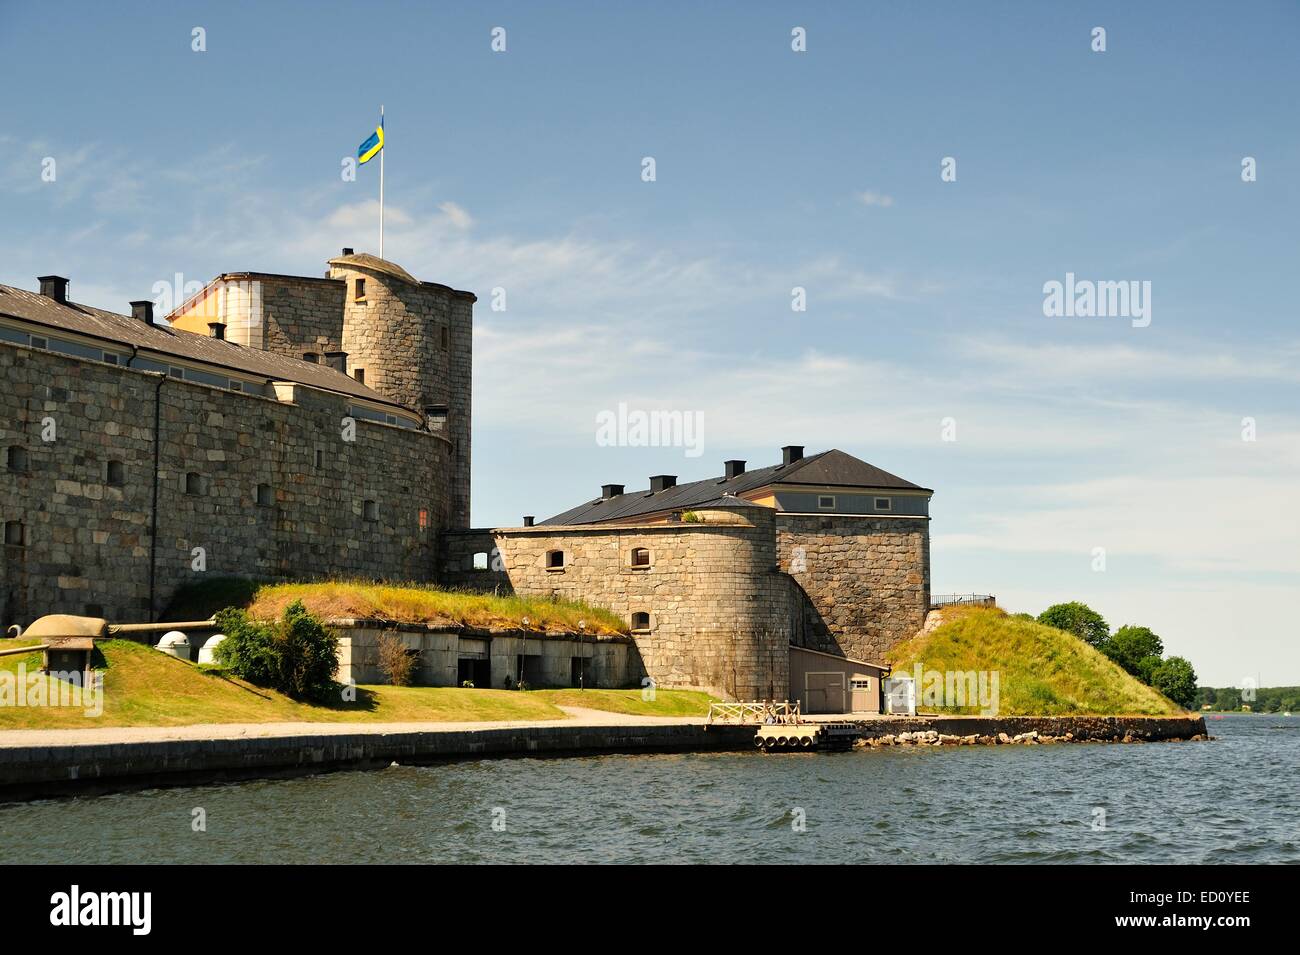 Vaxholm Fortress - Sweden Stock Photo